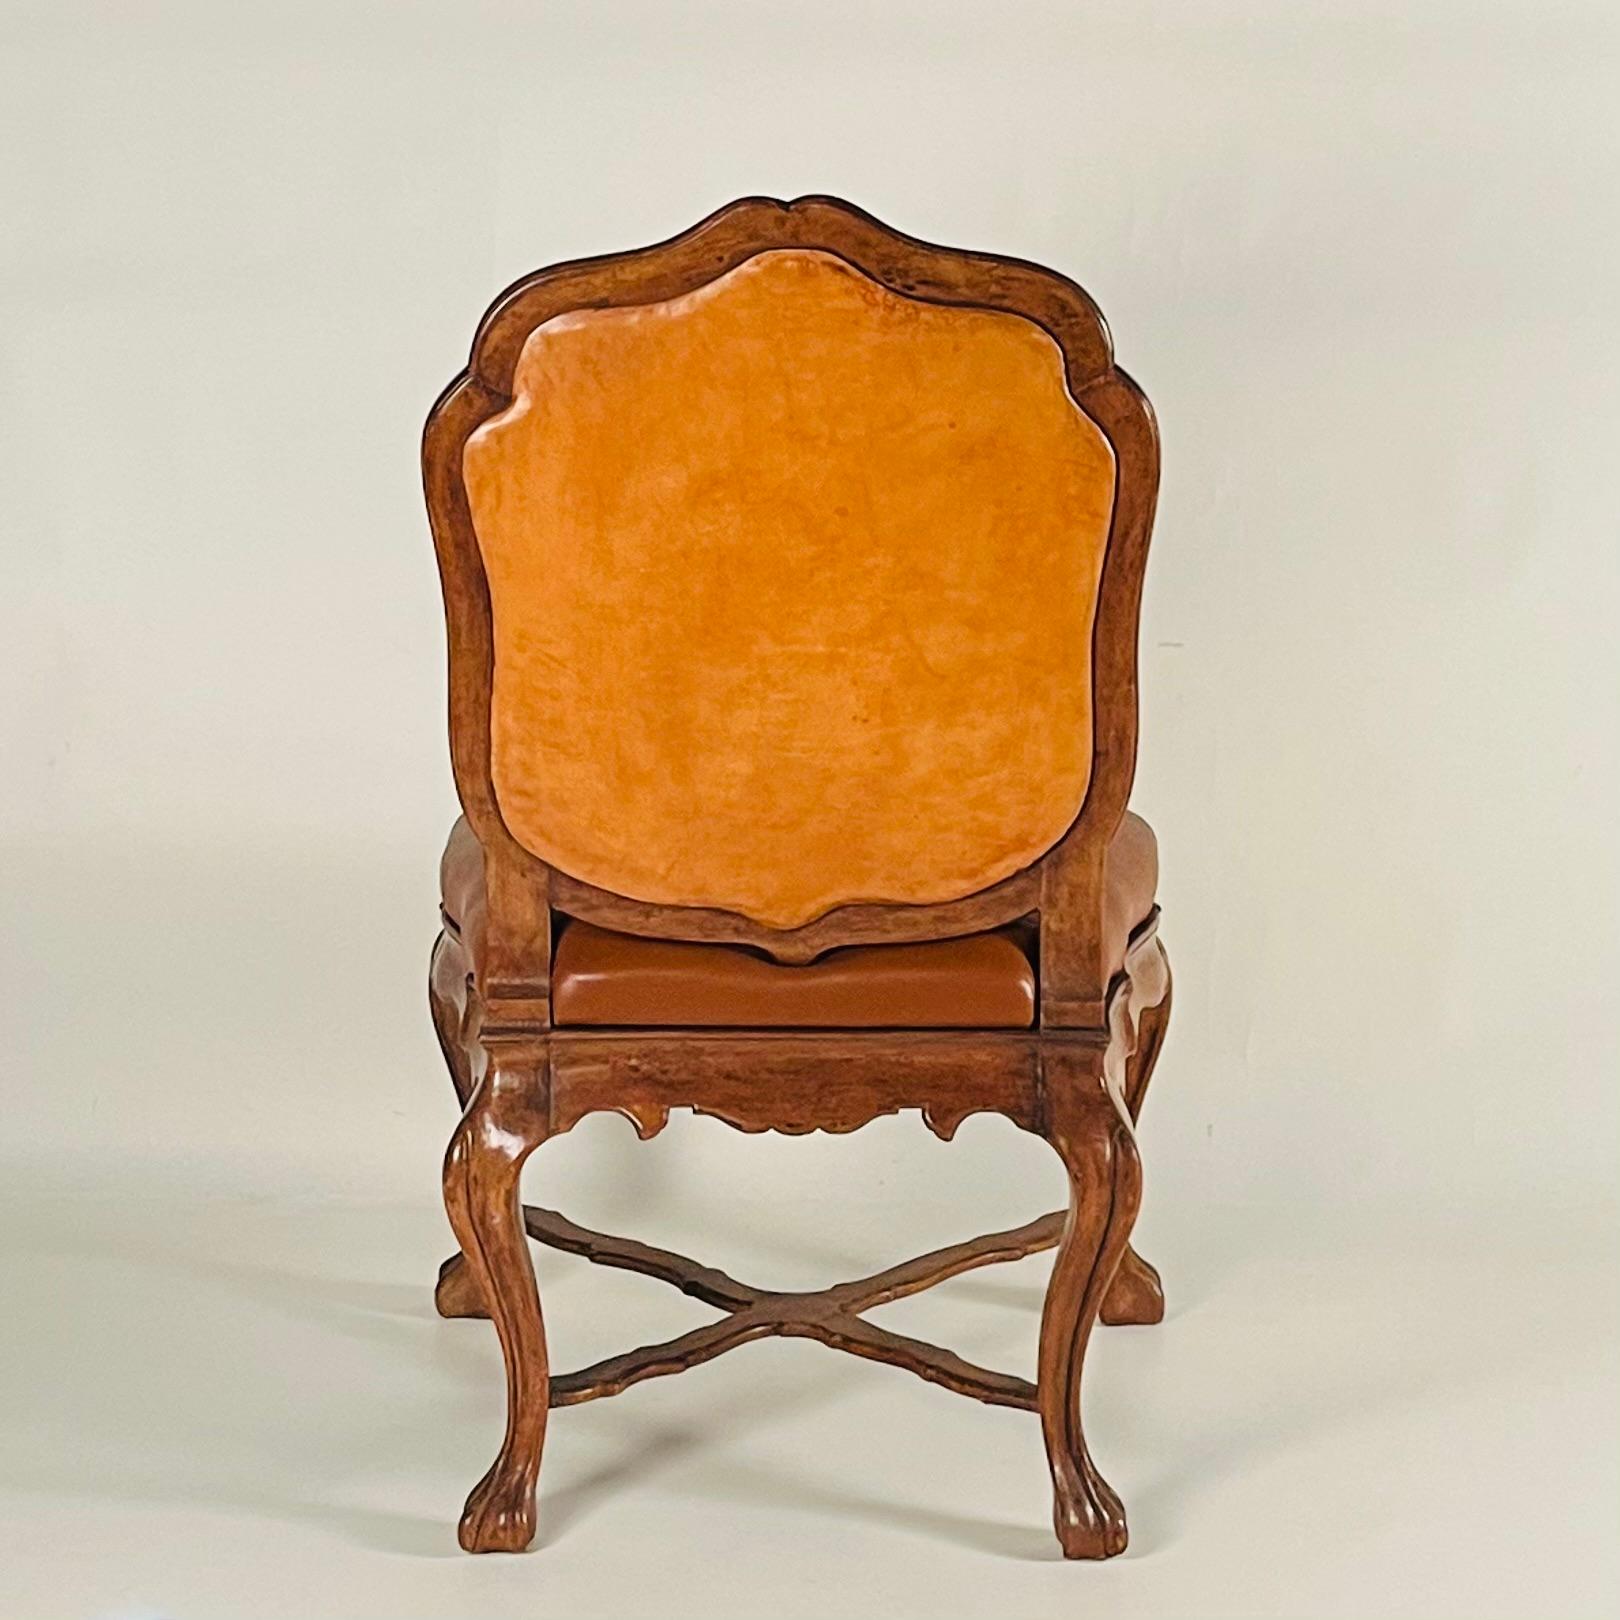 An elegant side chair that boasts impressive proportions and exquisite craftsmanship. It features beautiful carving on its walnut frame and is upholstered in fine leather. This side chair would make a sophisticated addition to a living room or